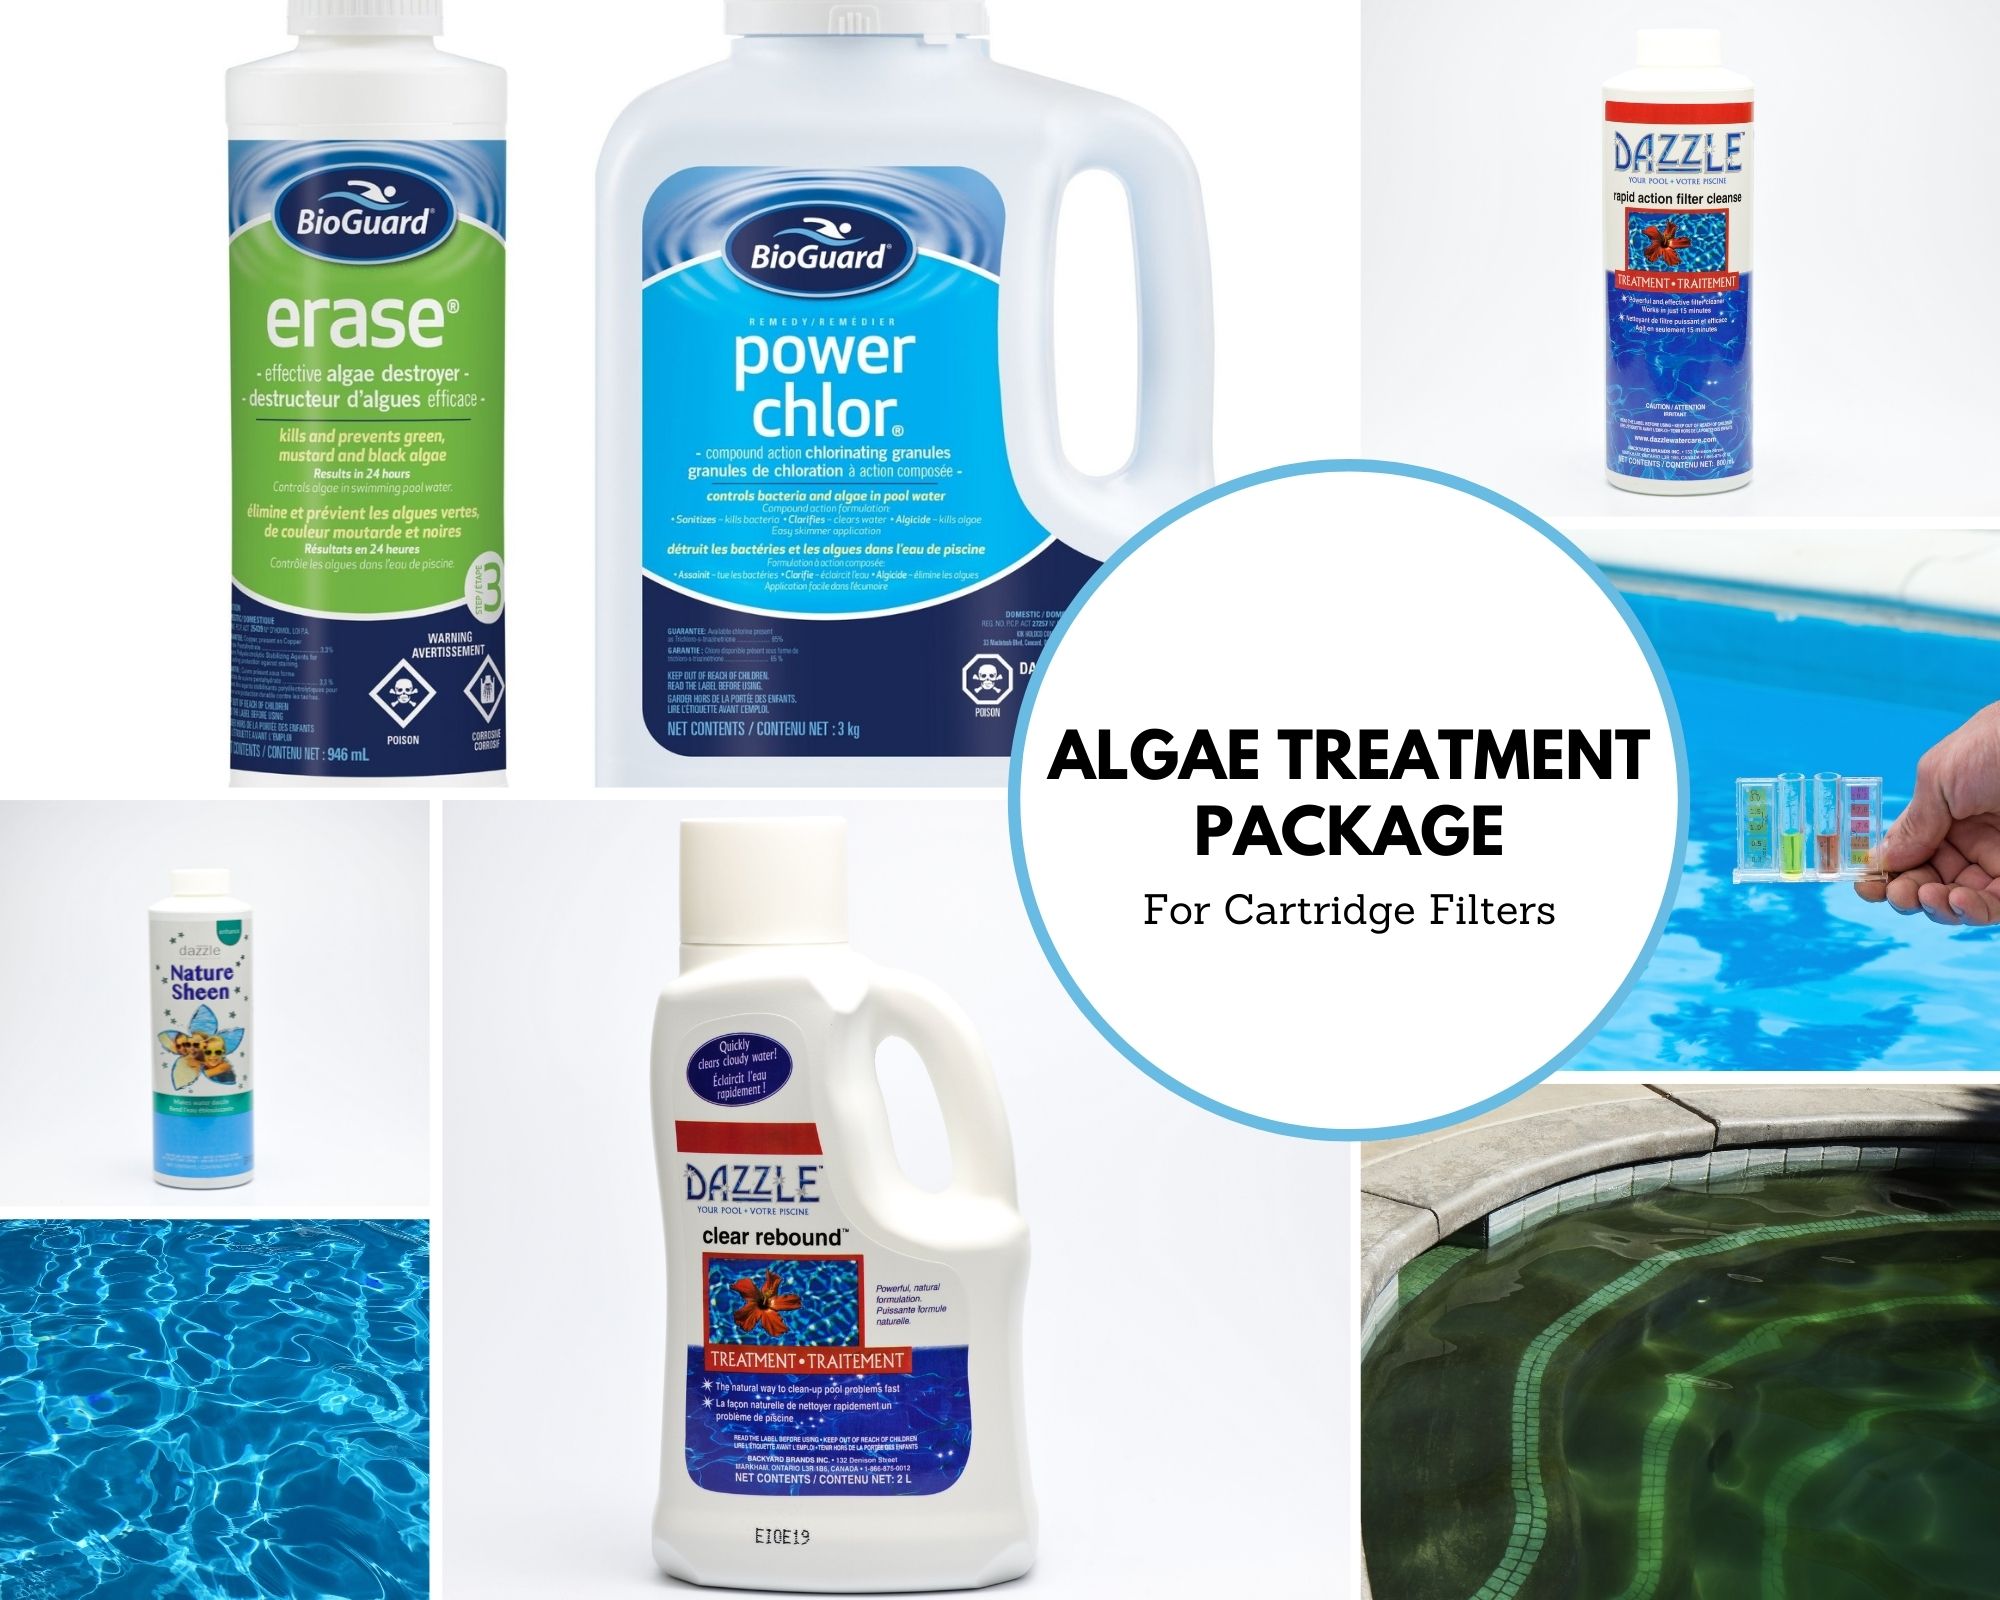 Algae Treatment Package - For Cartridge Filters